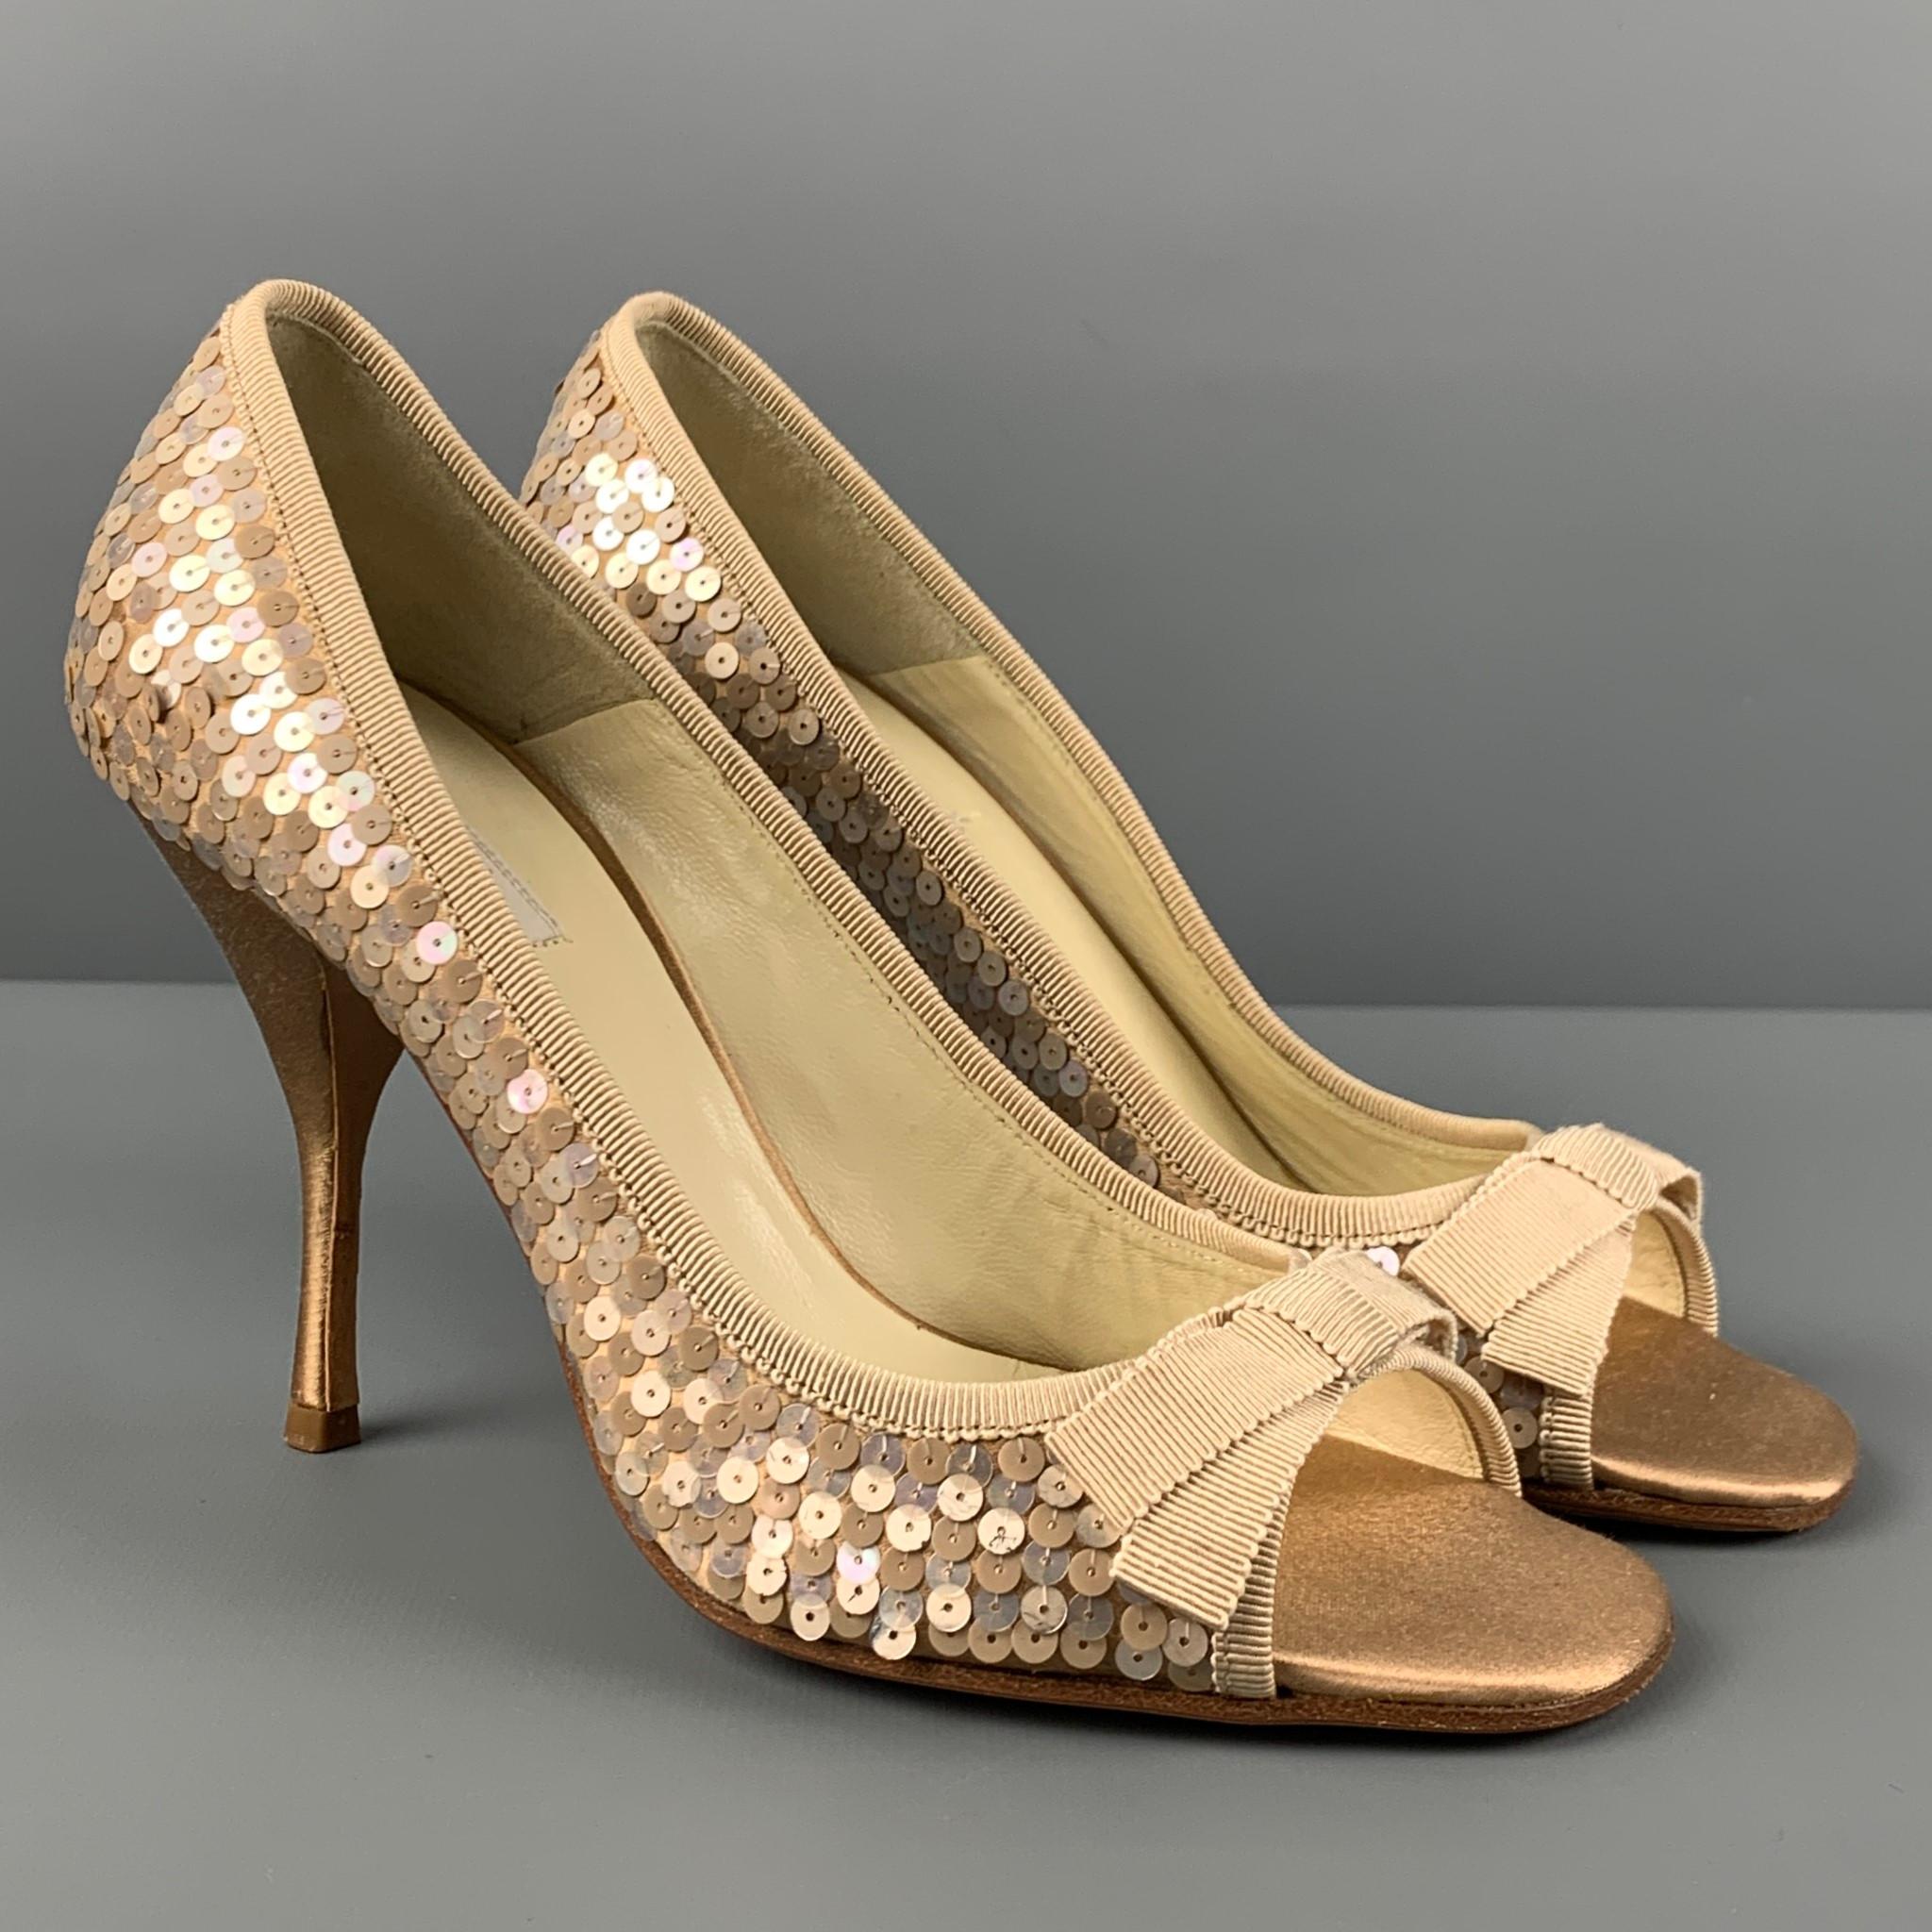 PRADA pumps comes in a taupe sequin silk featuring a front bow detail, open toe, and a stiletto heel. Made in Italy. 

Very Good Pre-Owned Condition.
Marked: 36.5

Measurements:

Heel: 3.75 in. 